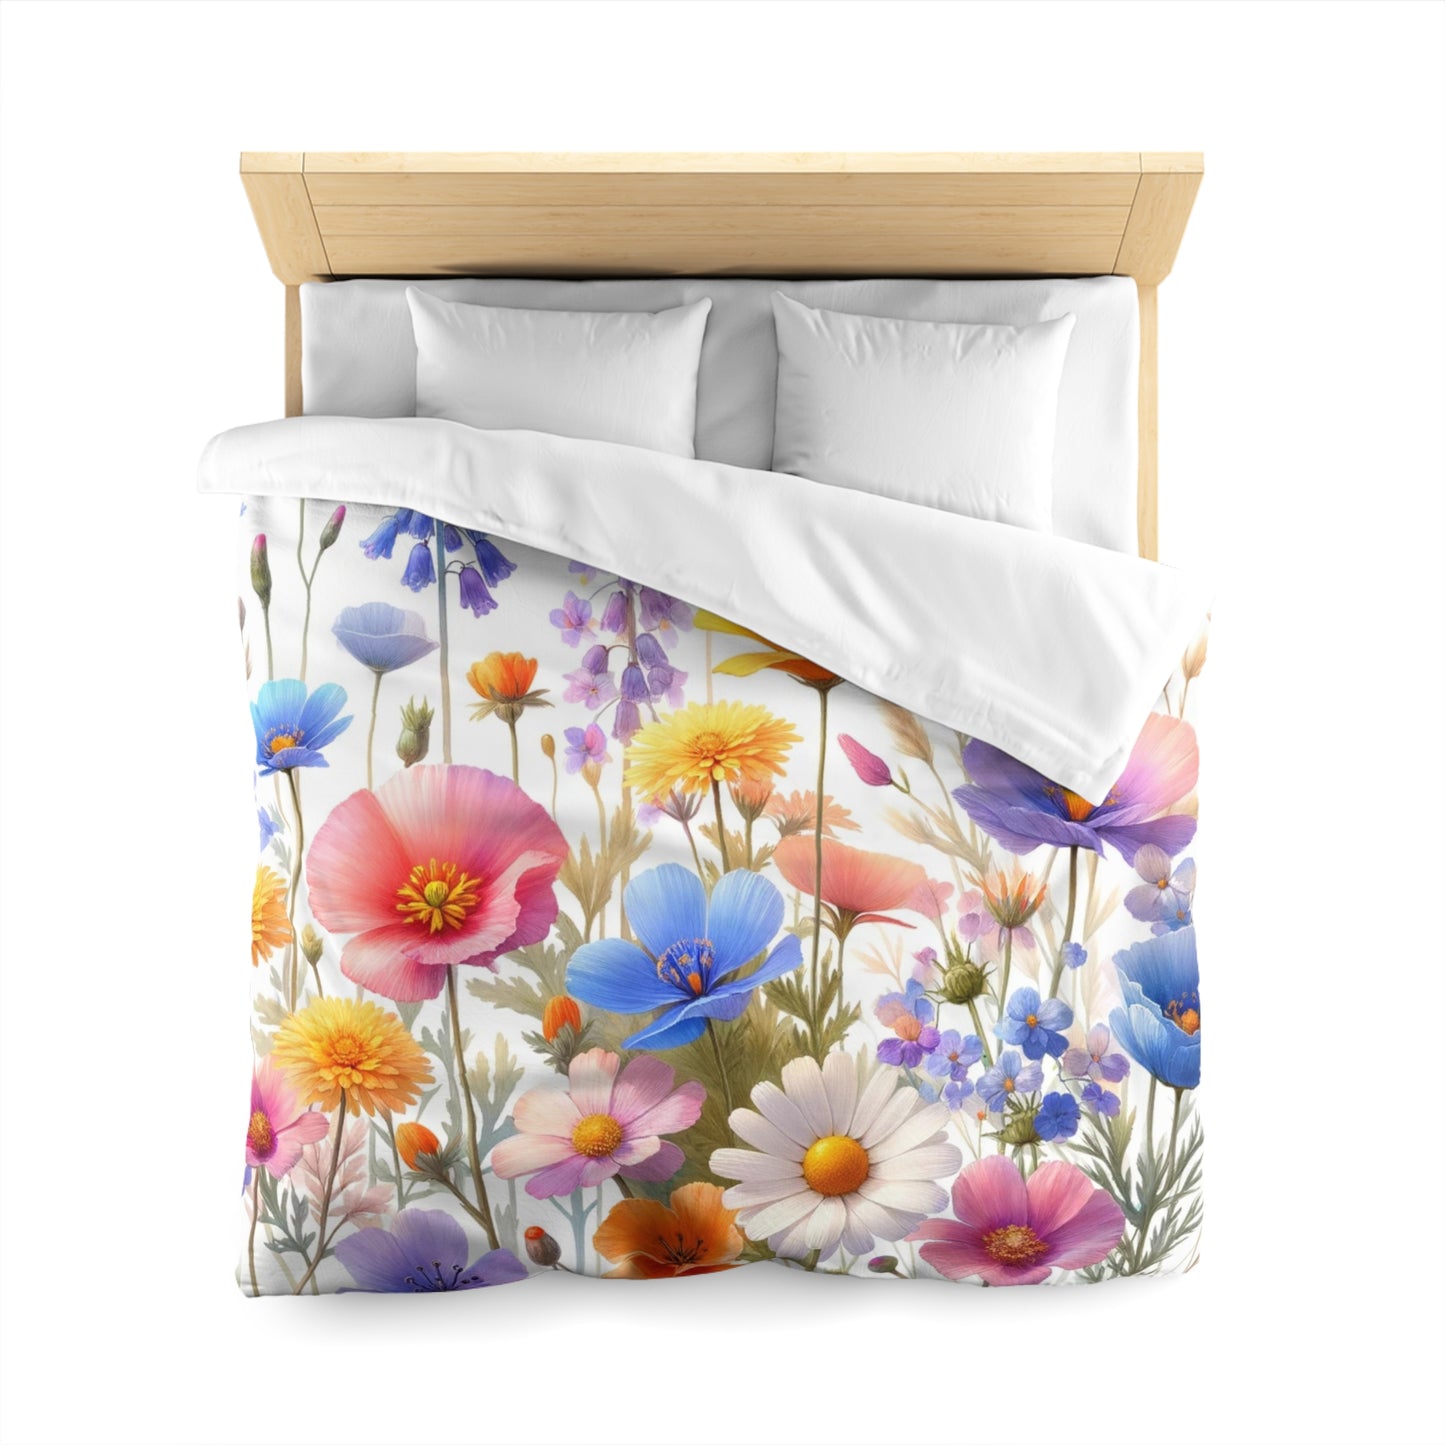 Wildflowers Duvet Cover, Floral Watercolor Pink Blue Bedding Queen King Full Twin XL Microfiber Unique Designer Bed Quilt Bedroom Decor